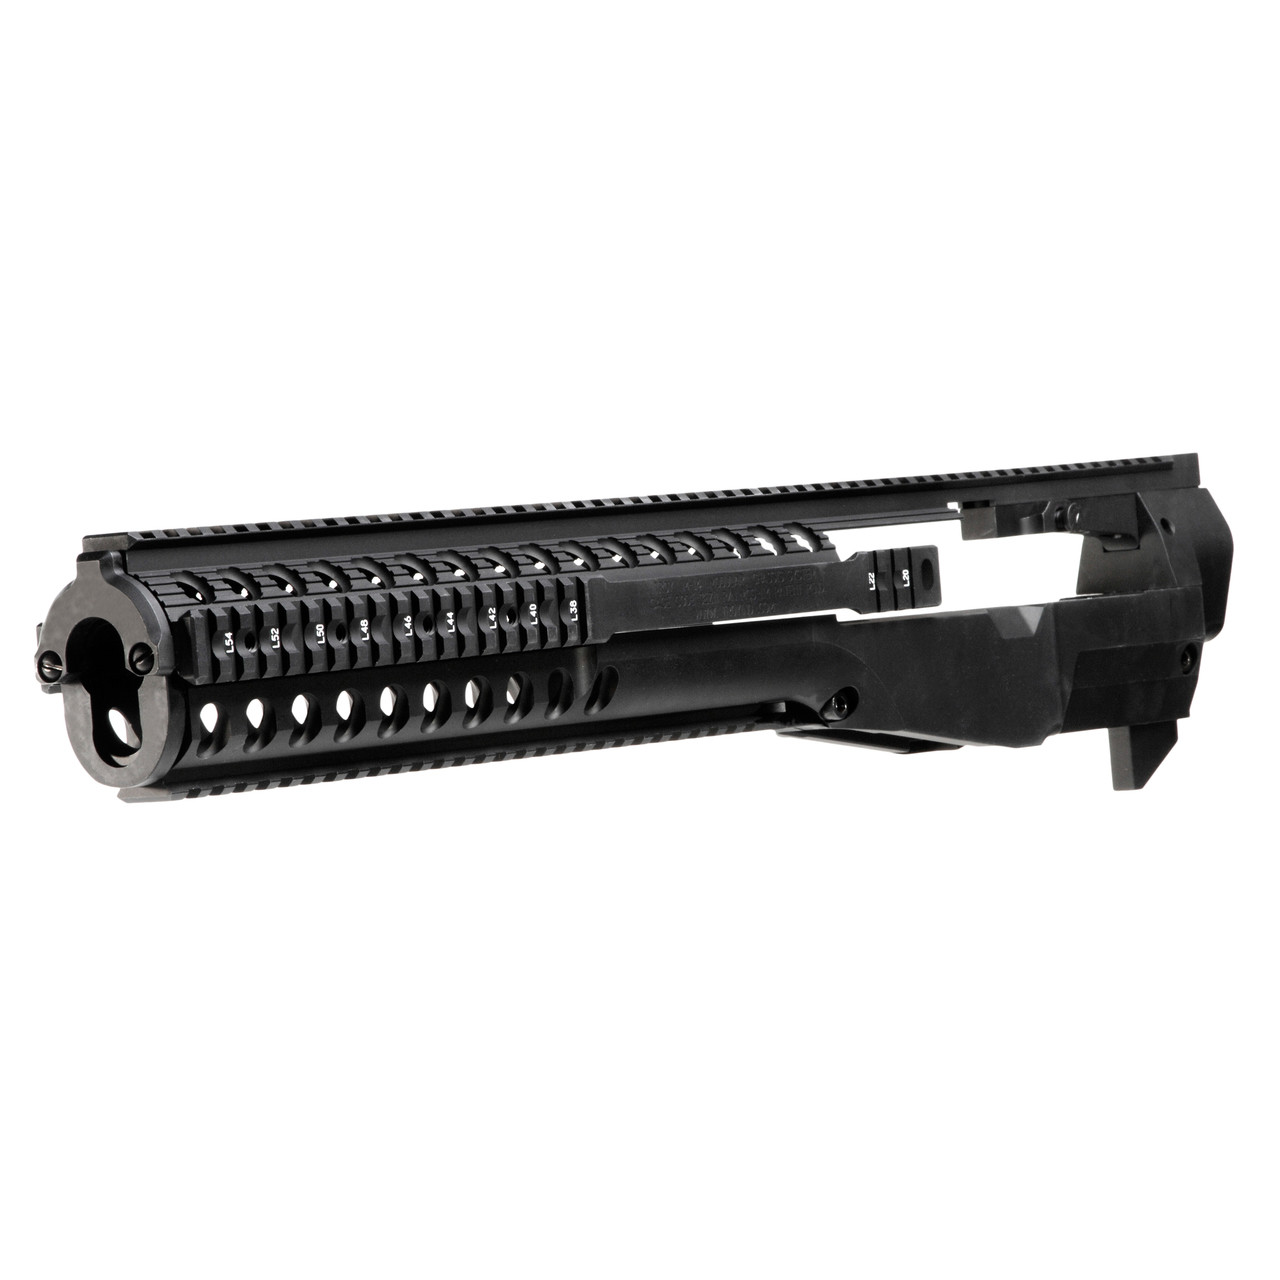 M14 Mcs Chassis Only Blk Upc